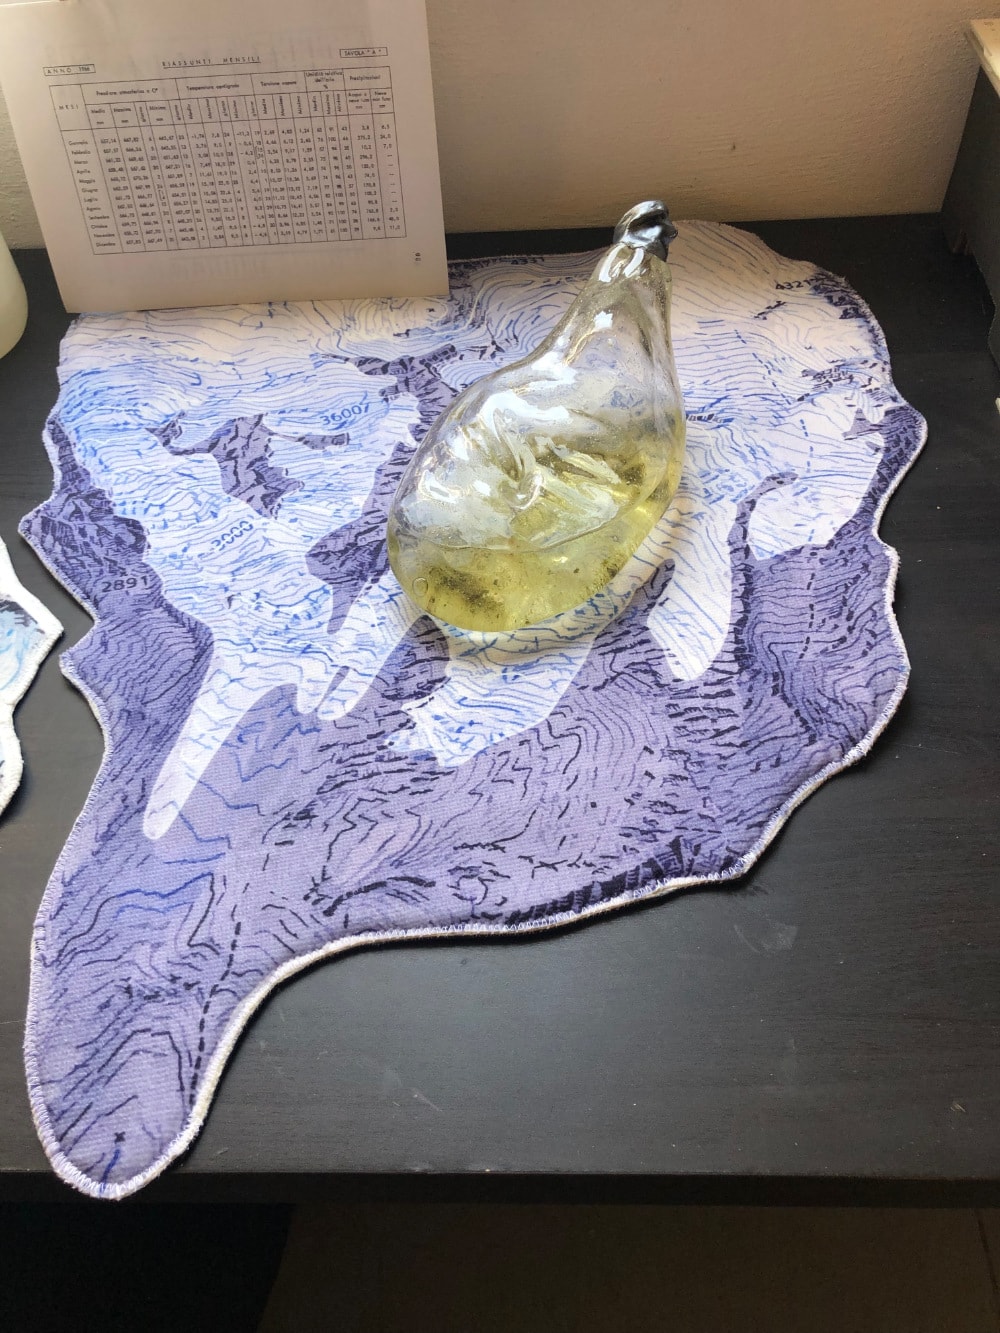 glass container/ object on a n object that looks like a small textile and a map